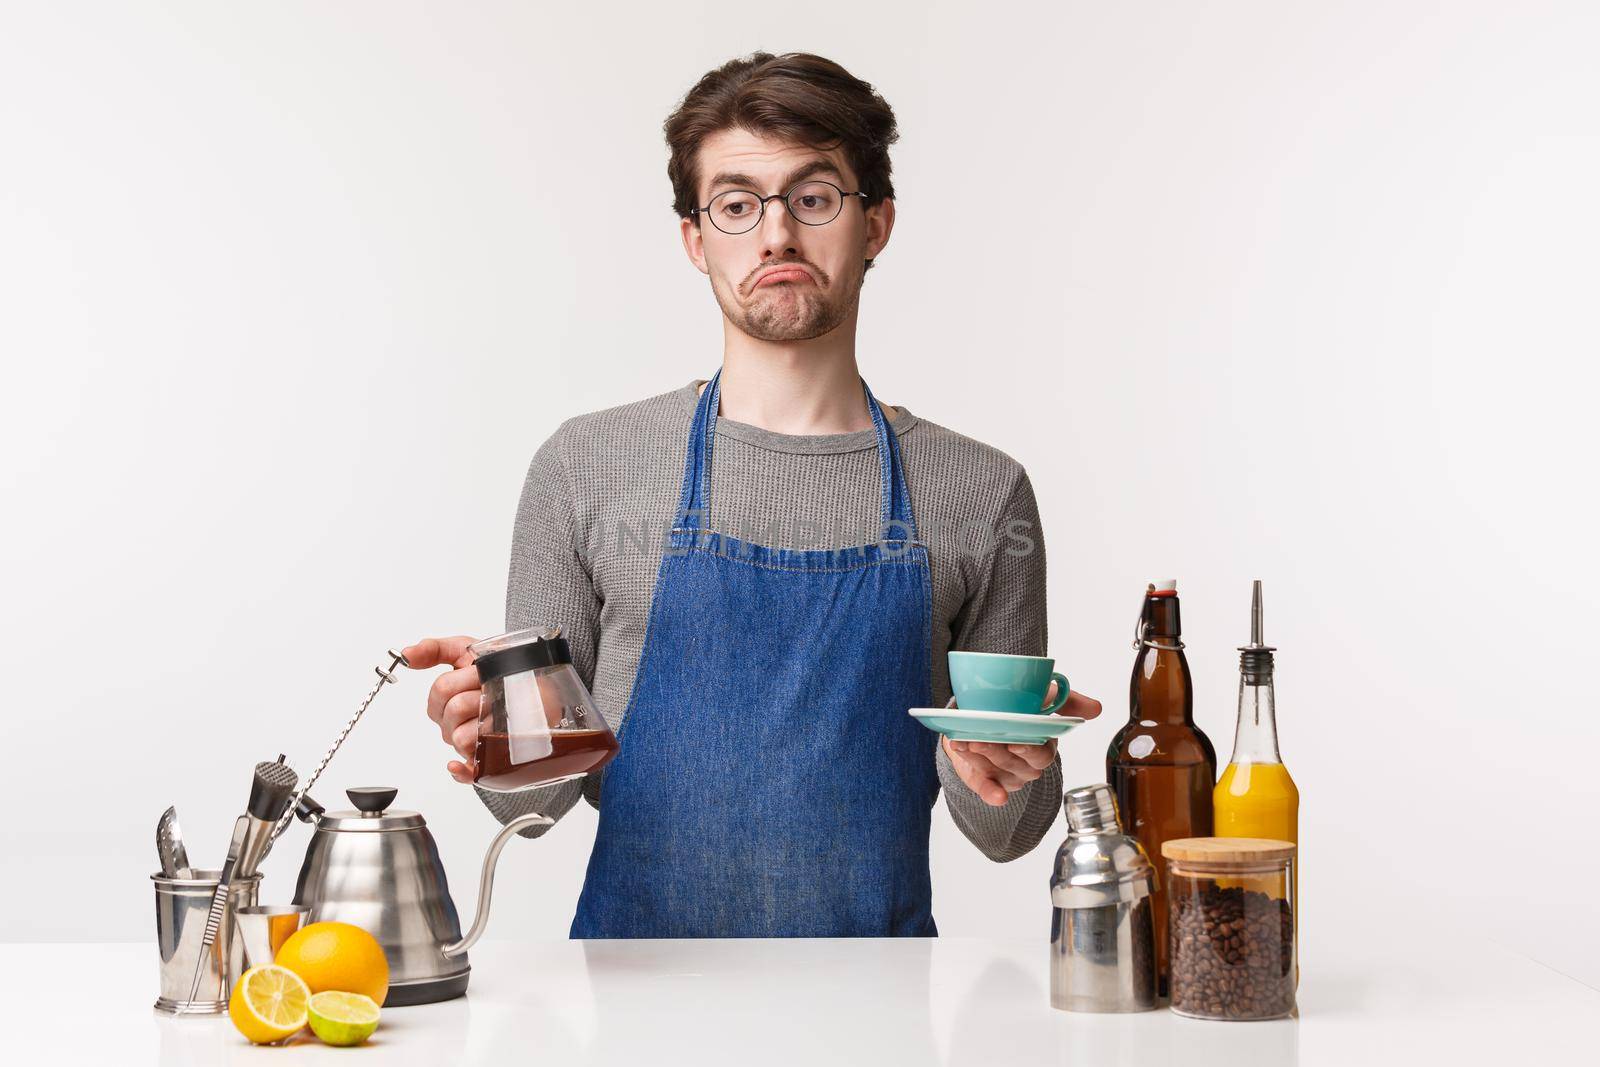 Barista, cafe worker and bartender concept. Portrait of indecisive careless young bored male employee grimacing look away uncertain, hold kettle with filter coffee and cup, white background.